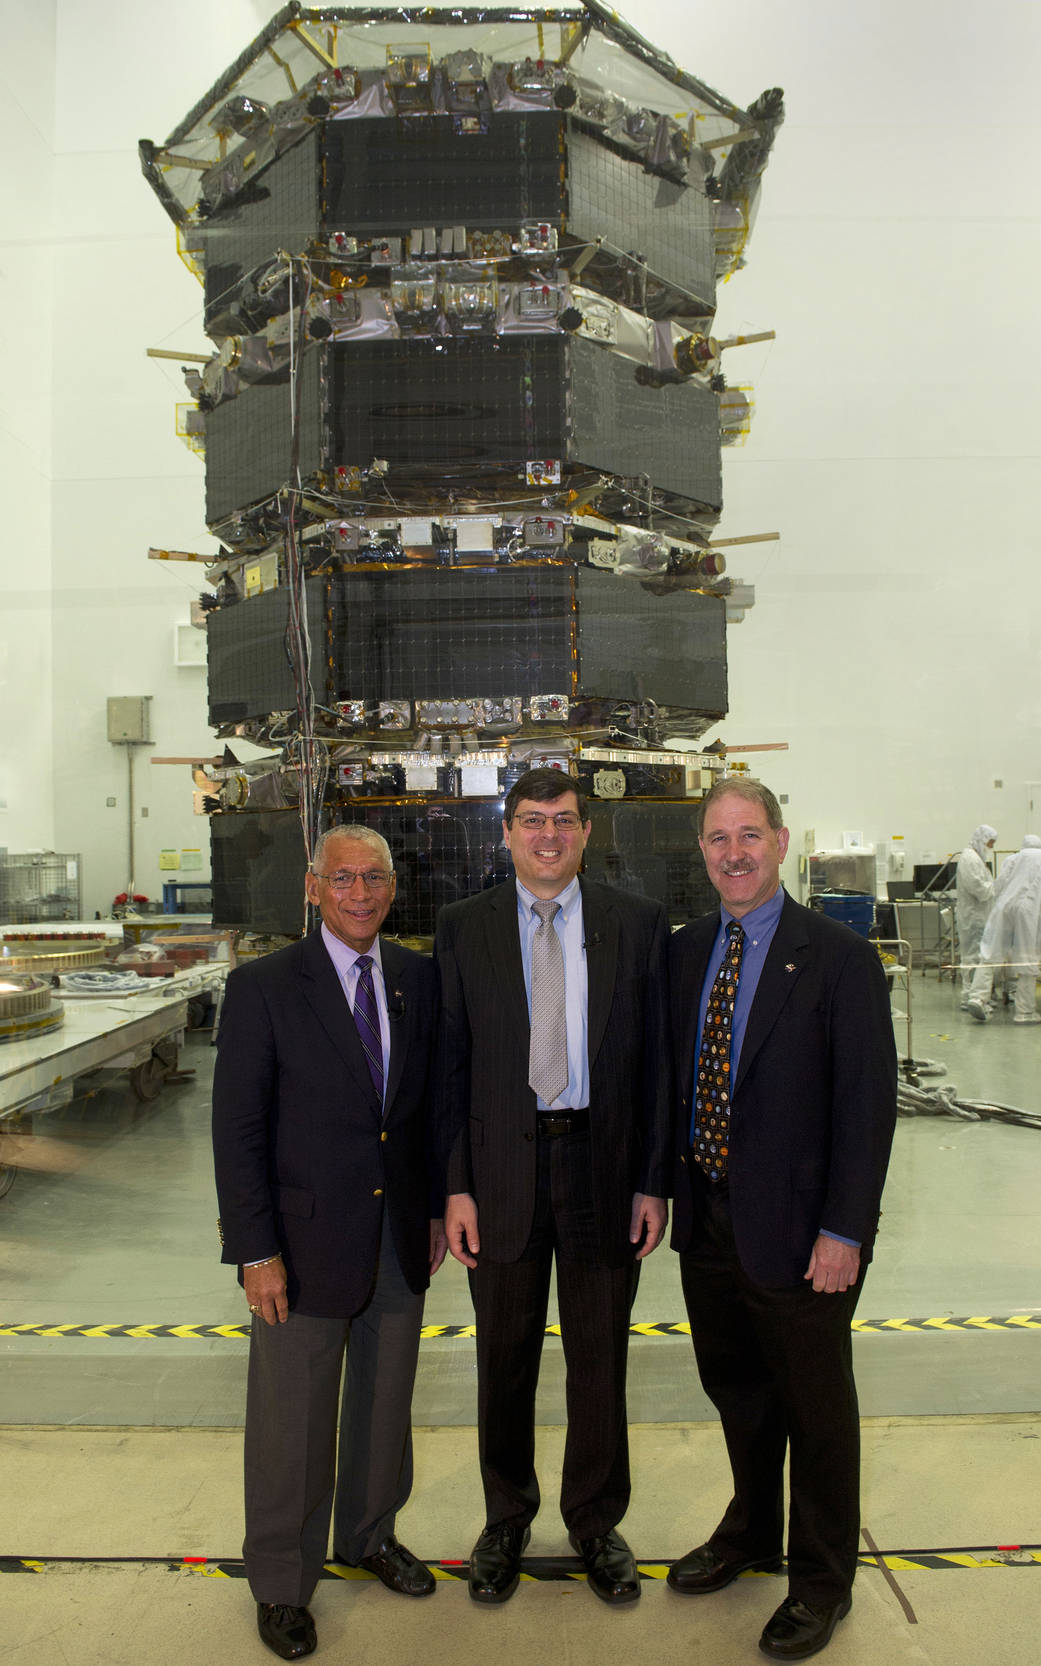 Posing in front of the stacked MMS spacecraft are (left to right): Charles Bolden, Chris Scolese and John Grunsfeld.